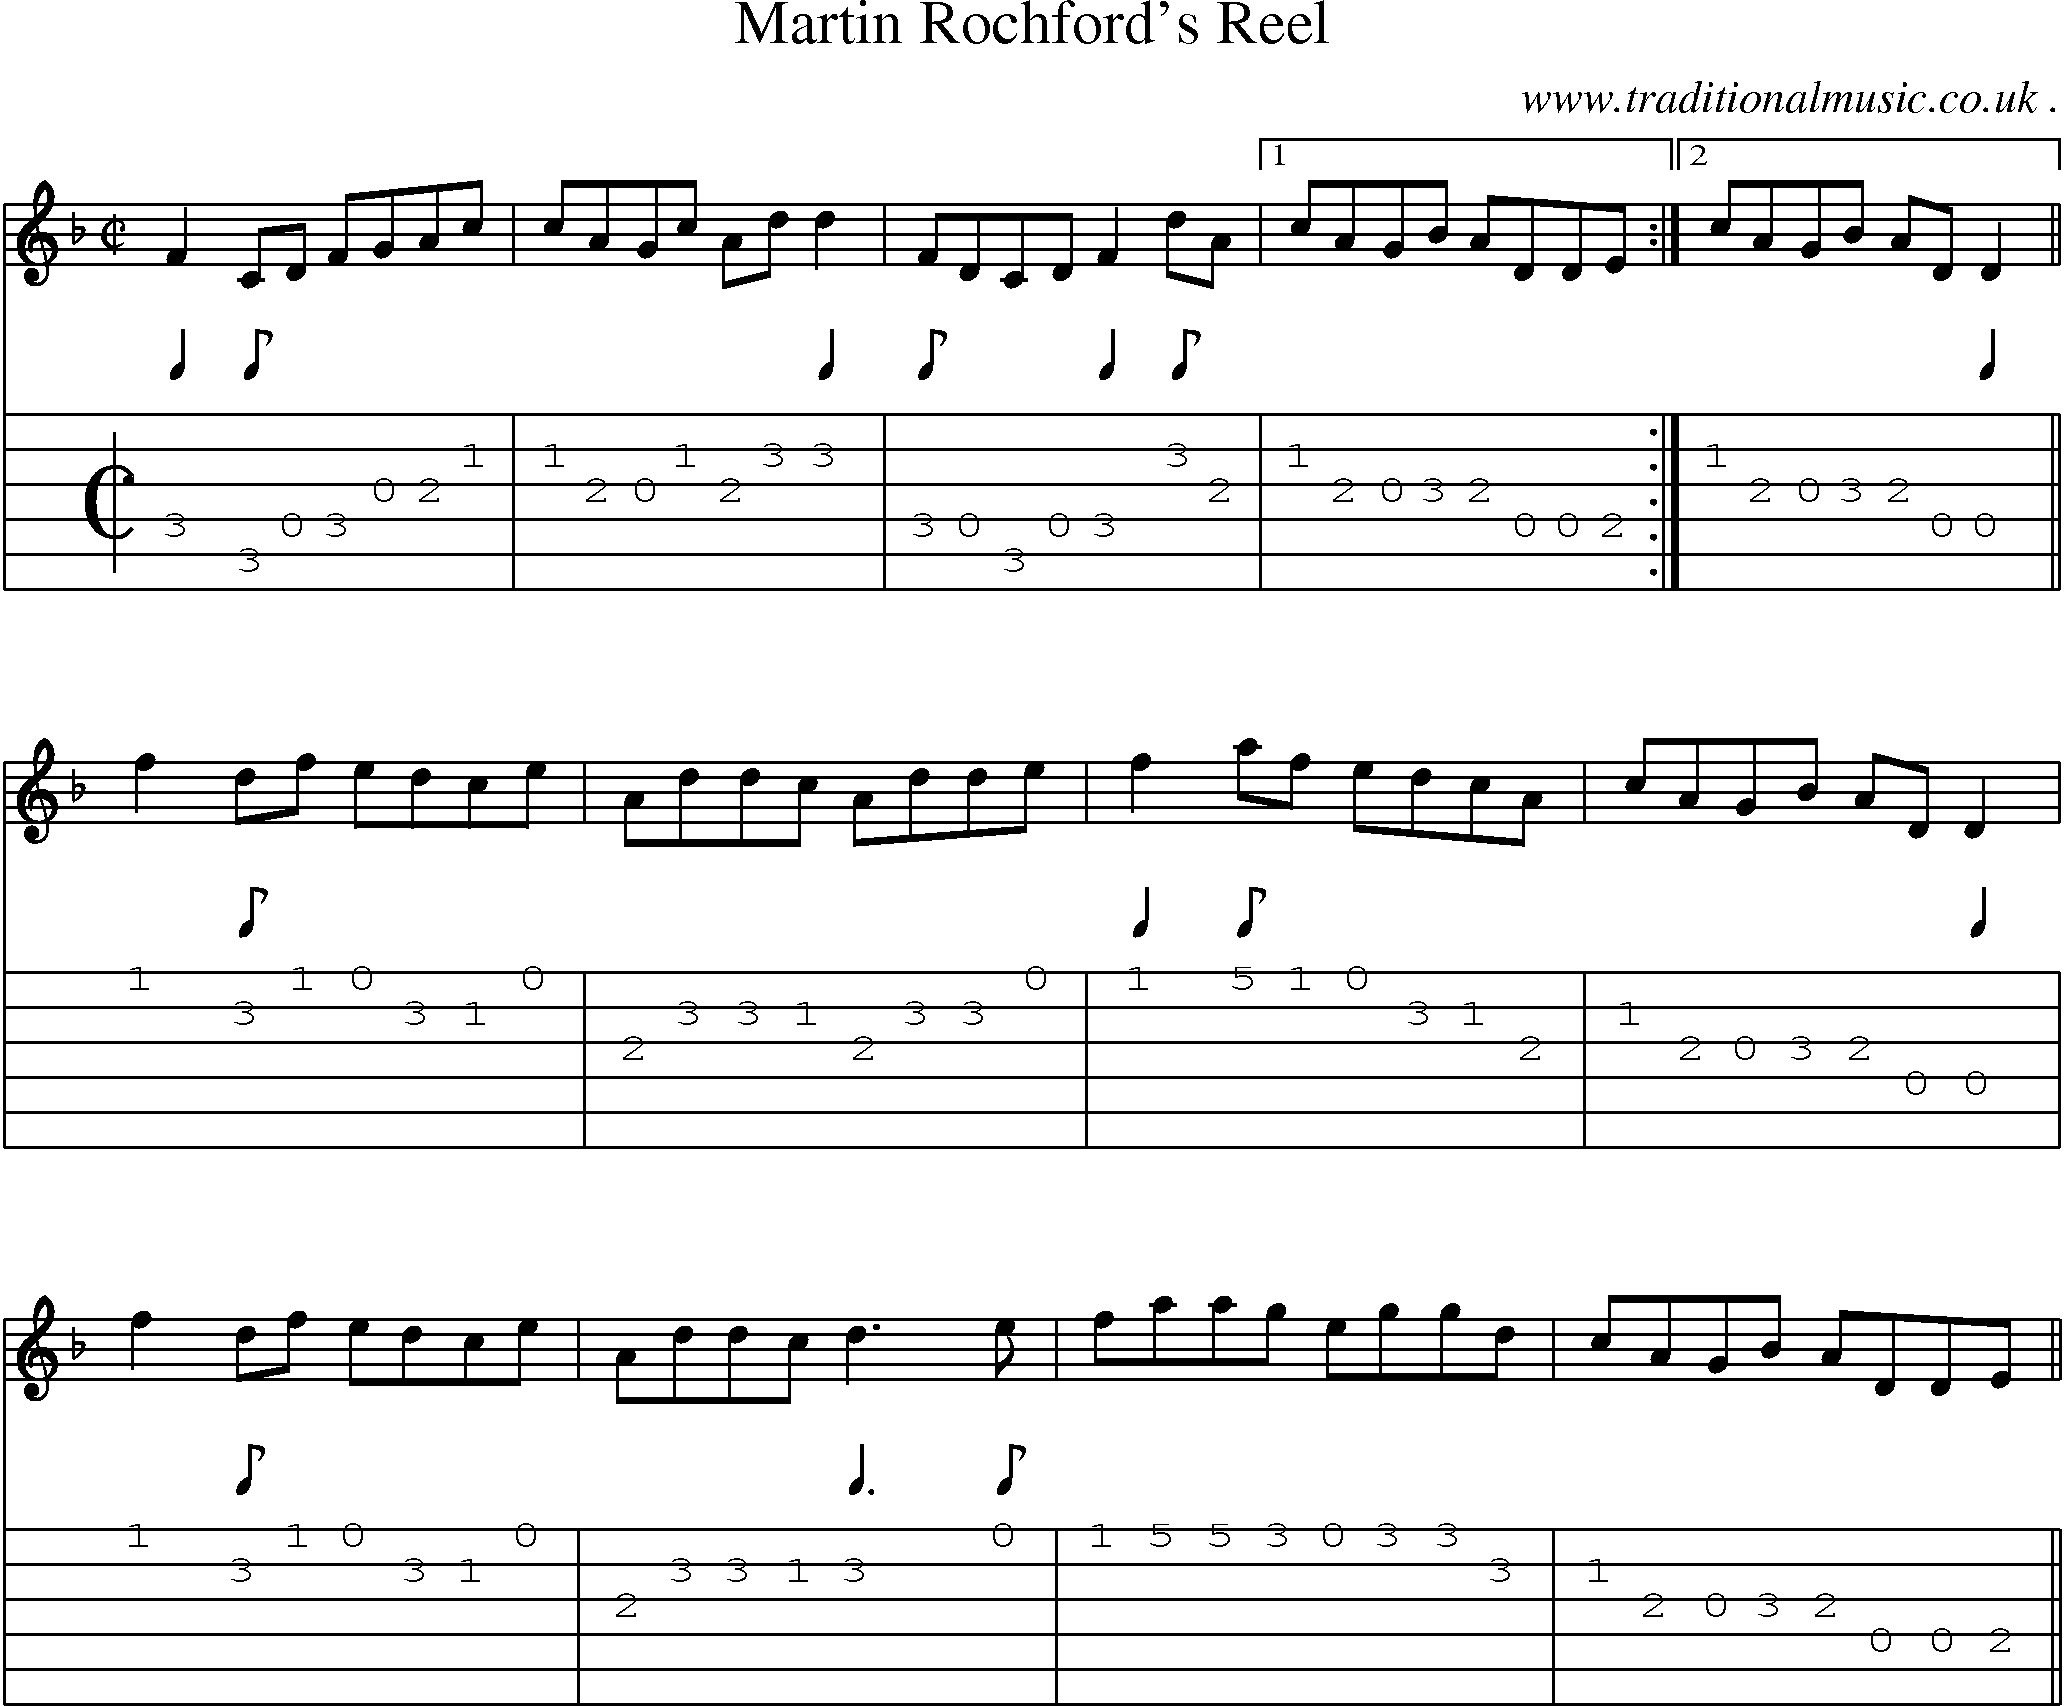 Sheet-Music and Guitar Tabs for Martin Rochfords Reel